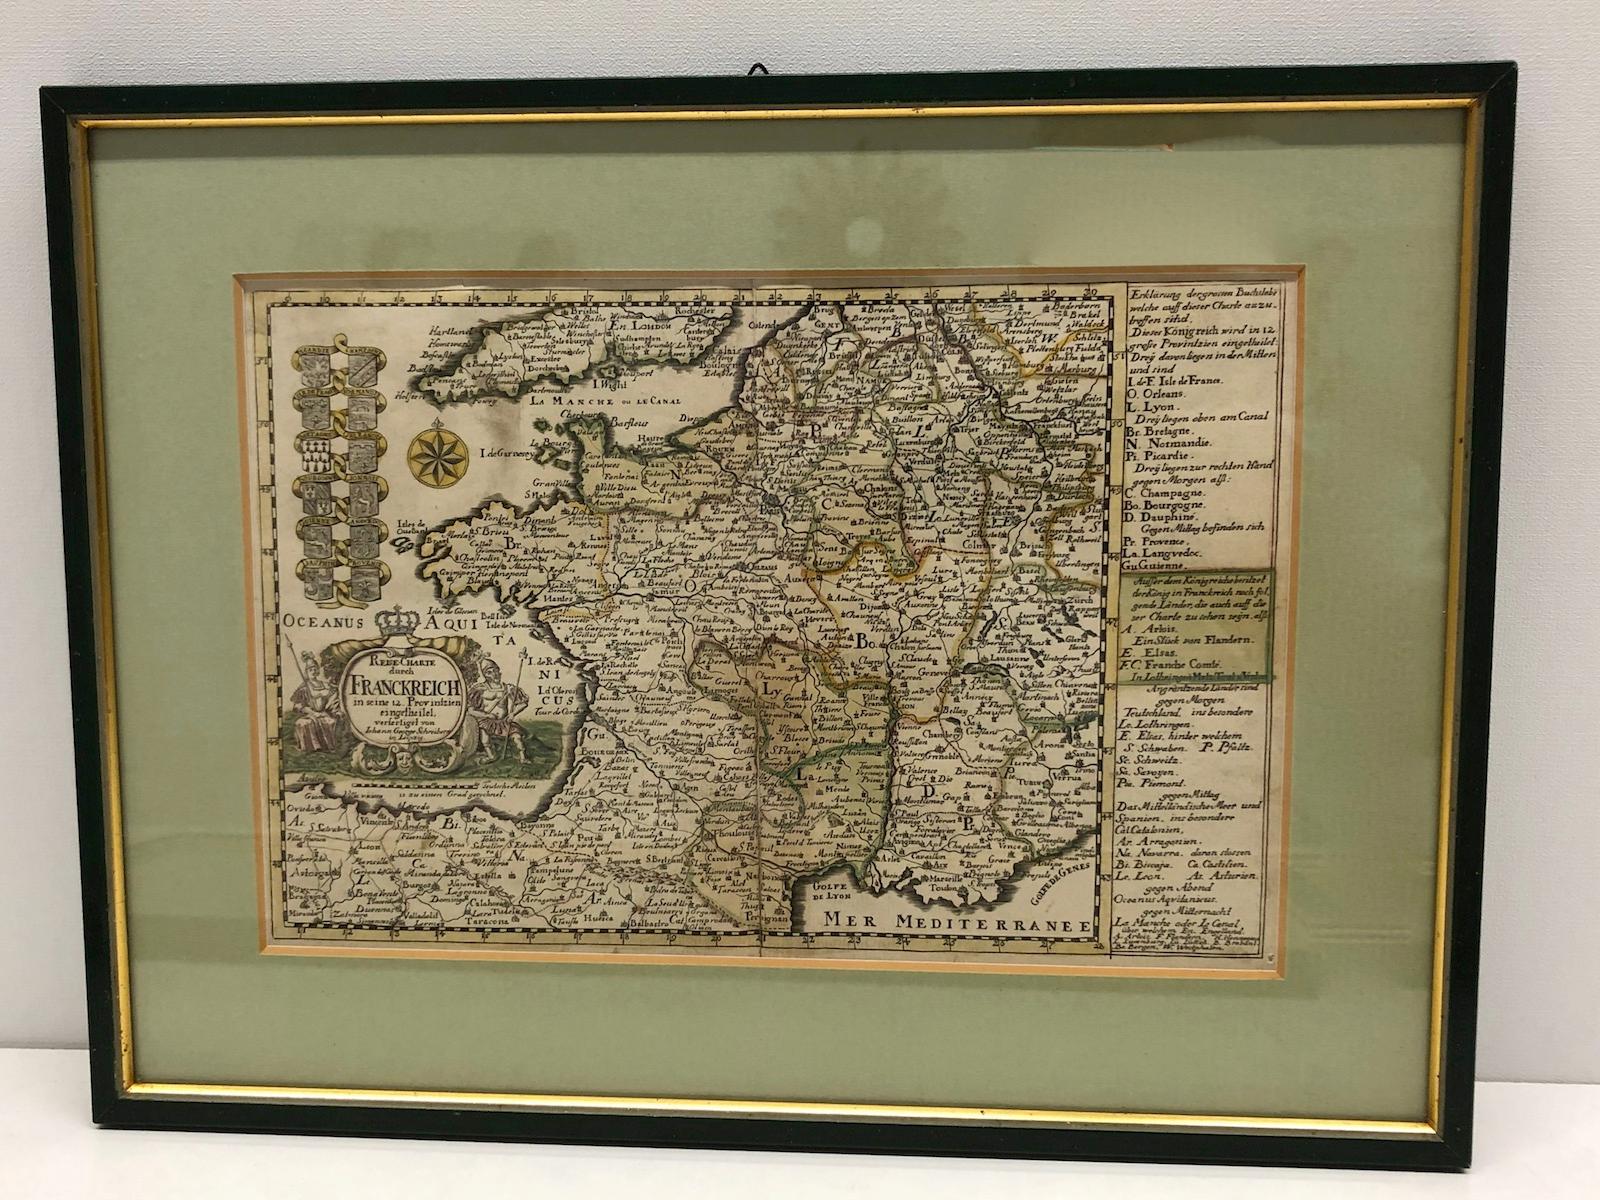 An extraordinary original antique map, framed in the 1970s by Brehm Nuremberg, Germany, showing the Country of France. Map is dated 1740 and approx. 10 ¼